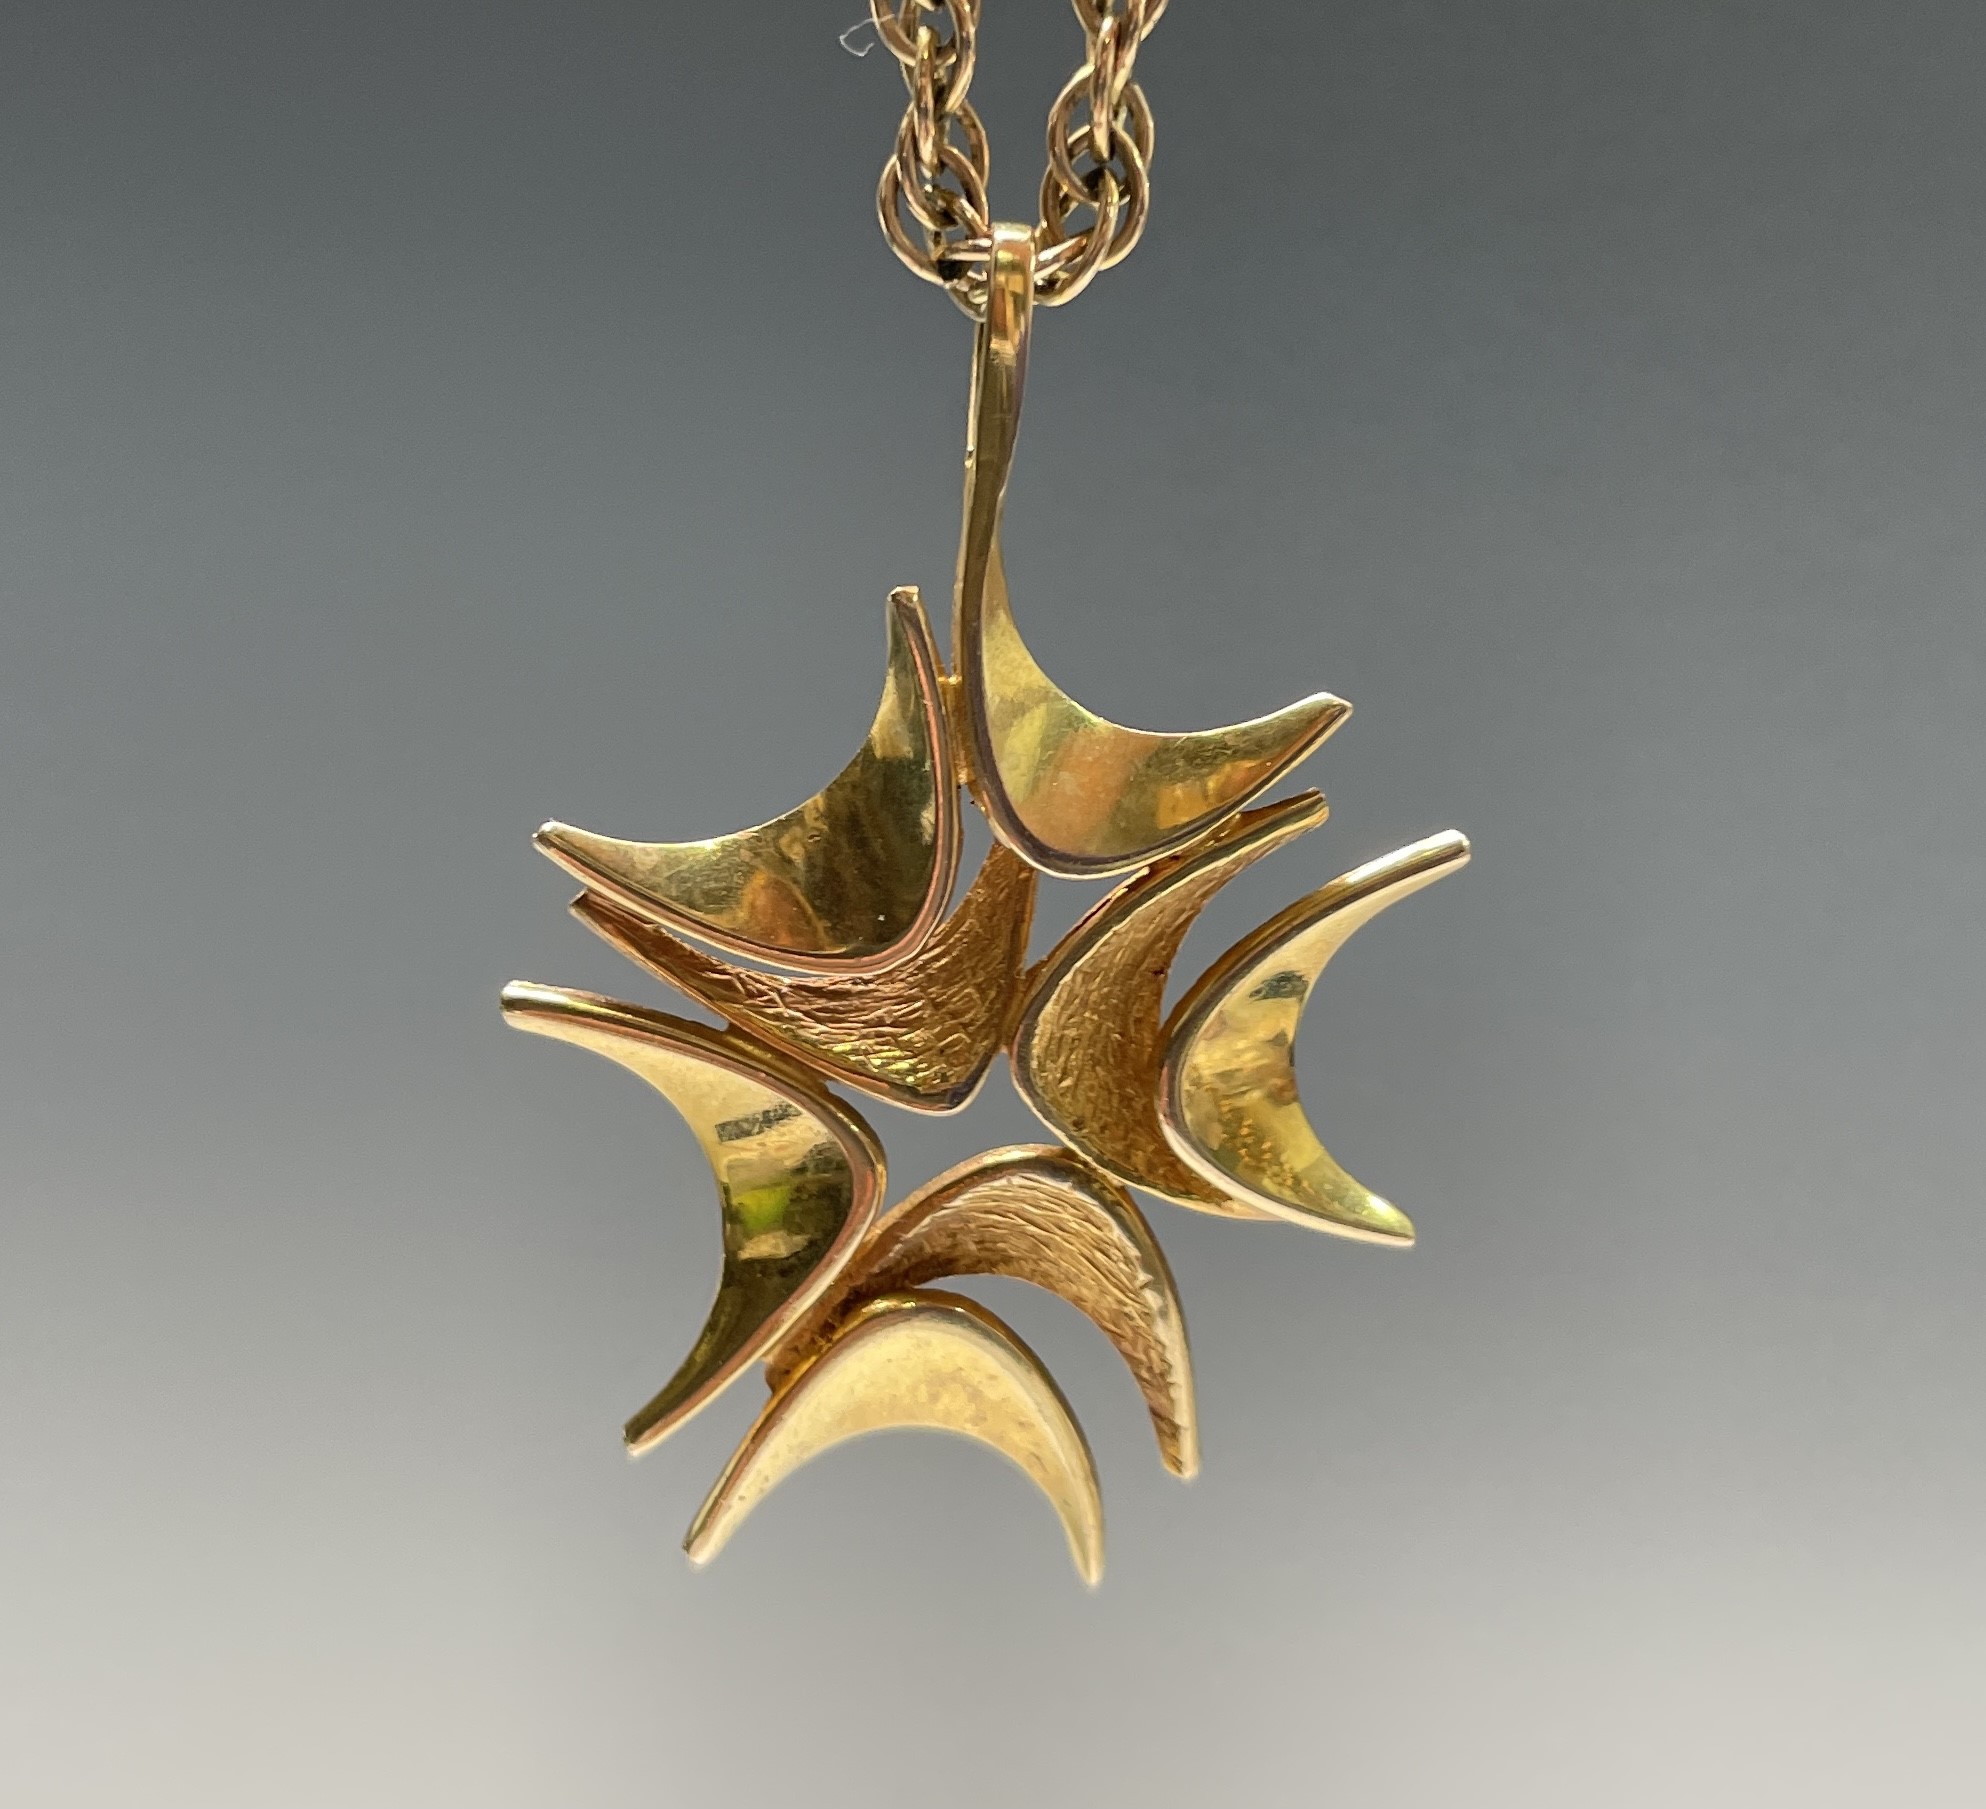 A 9ct gold modernist pendant by Henry Griffiths and Sons 1975 18.4gm including 9ct rope-twist 60cm - Image 6 of 6